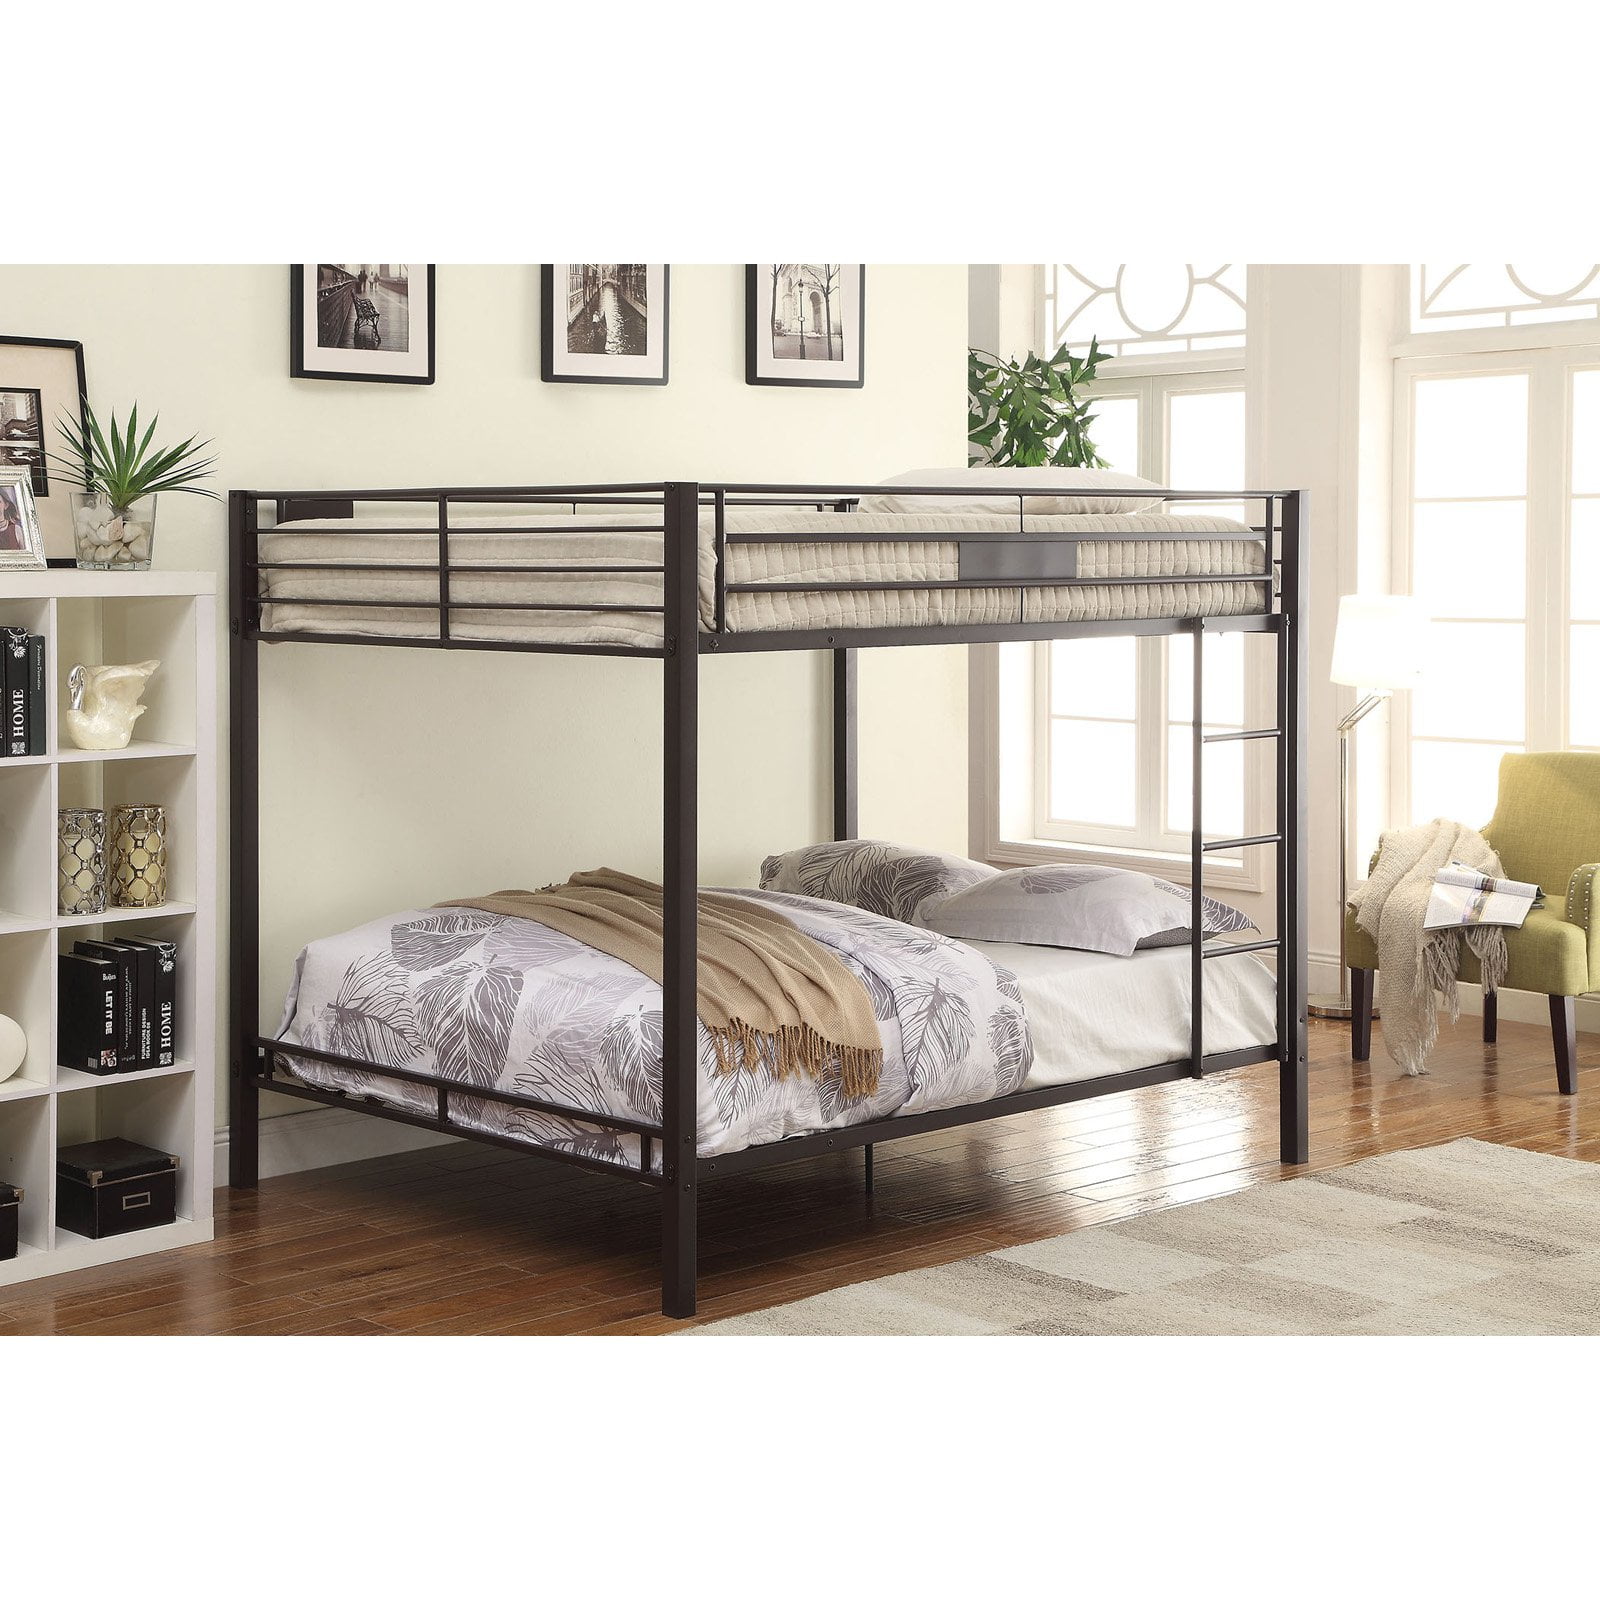 Acme Furniture Kaleb Queen Over, Acme Furniture Bunk Bed Instructions